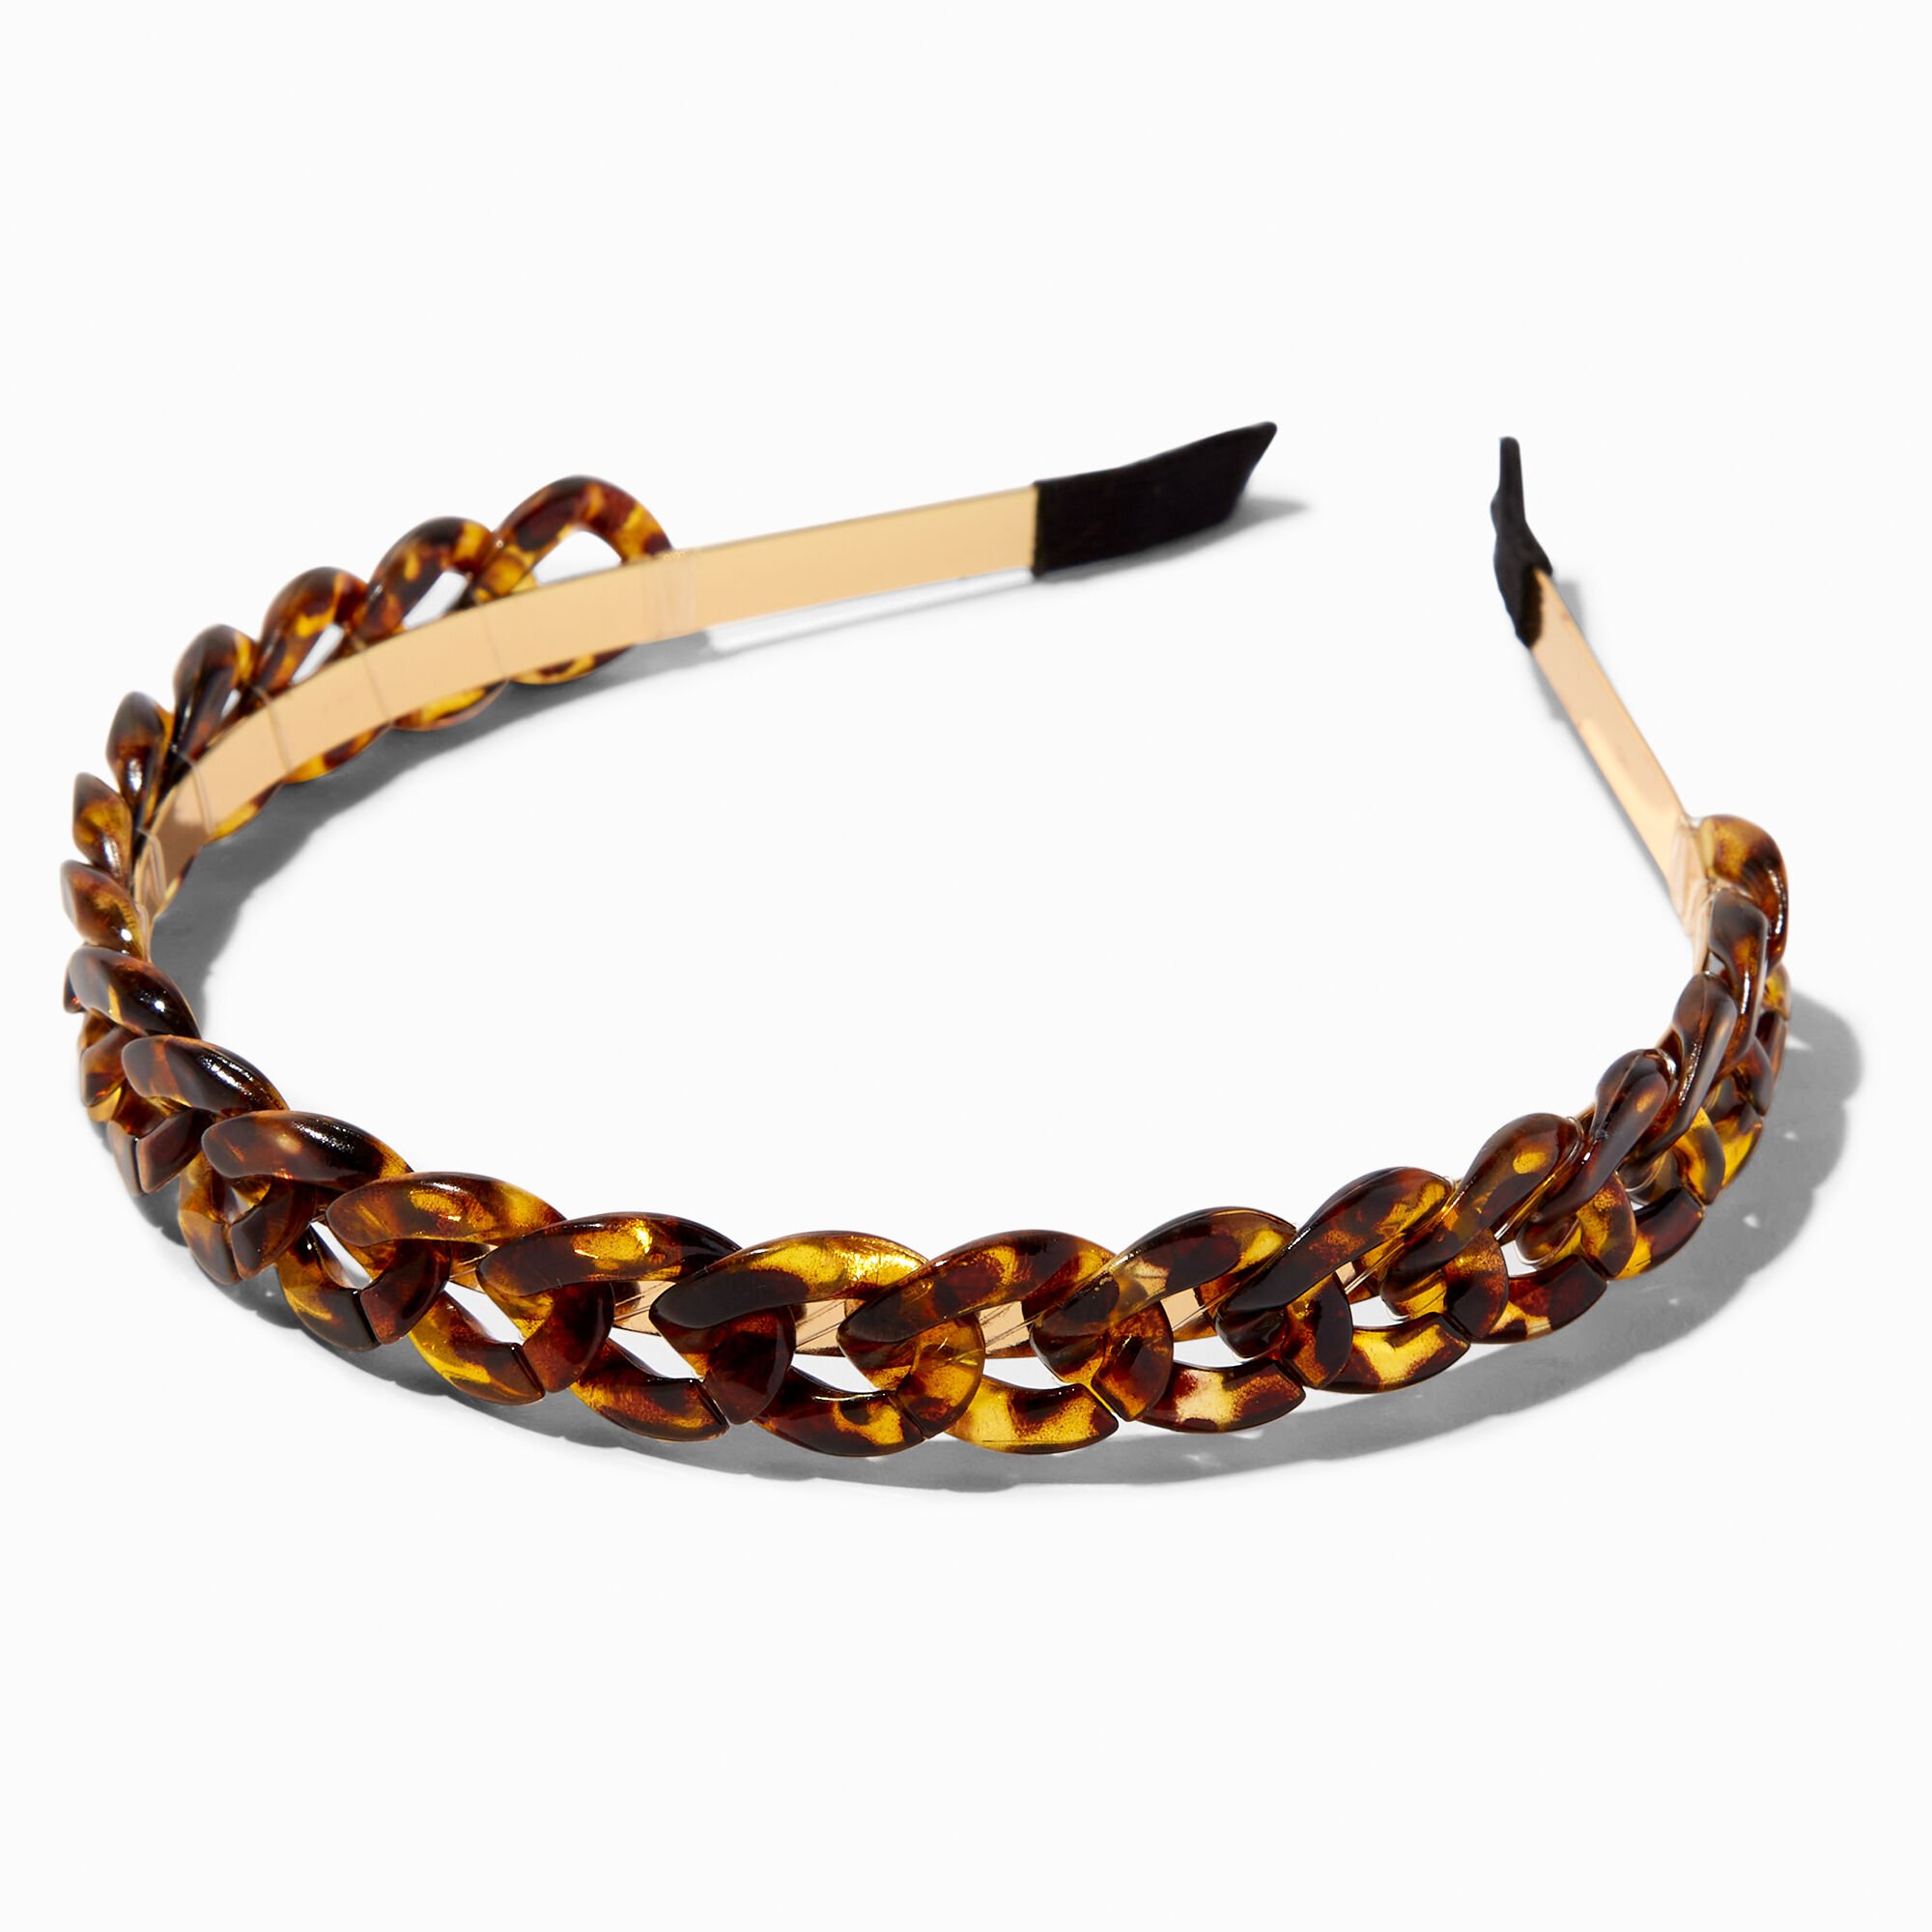 View Claires Tortoiseshell Chain Link Headband Brown information